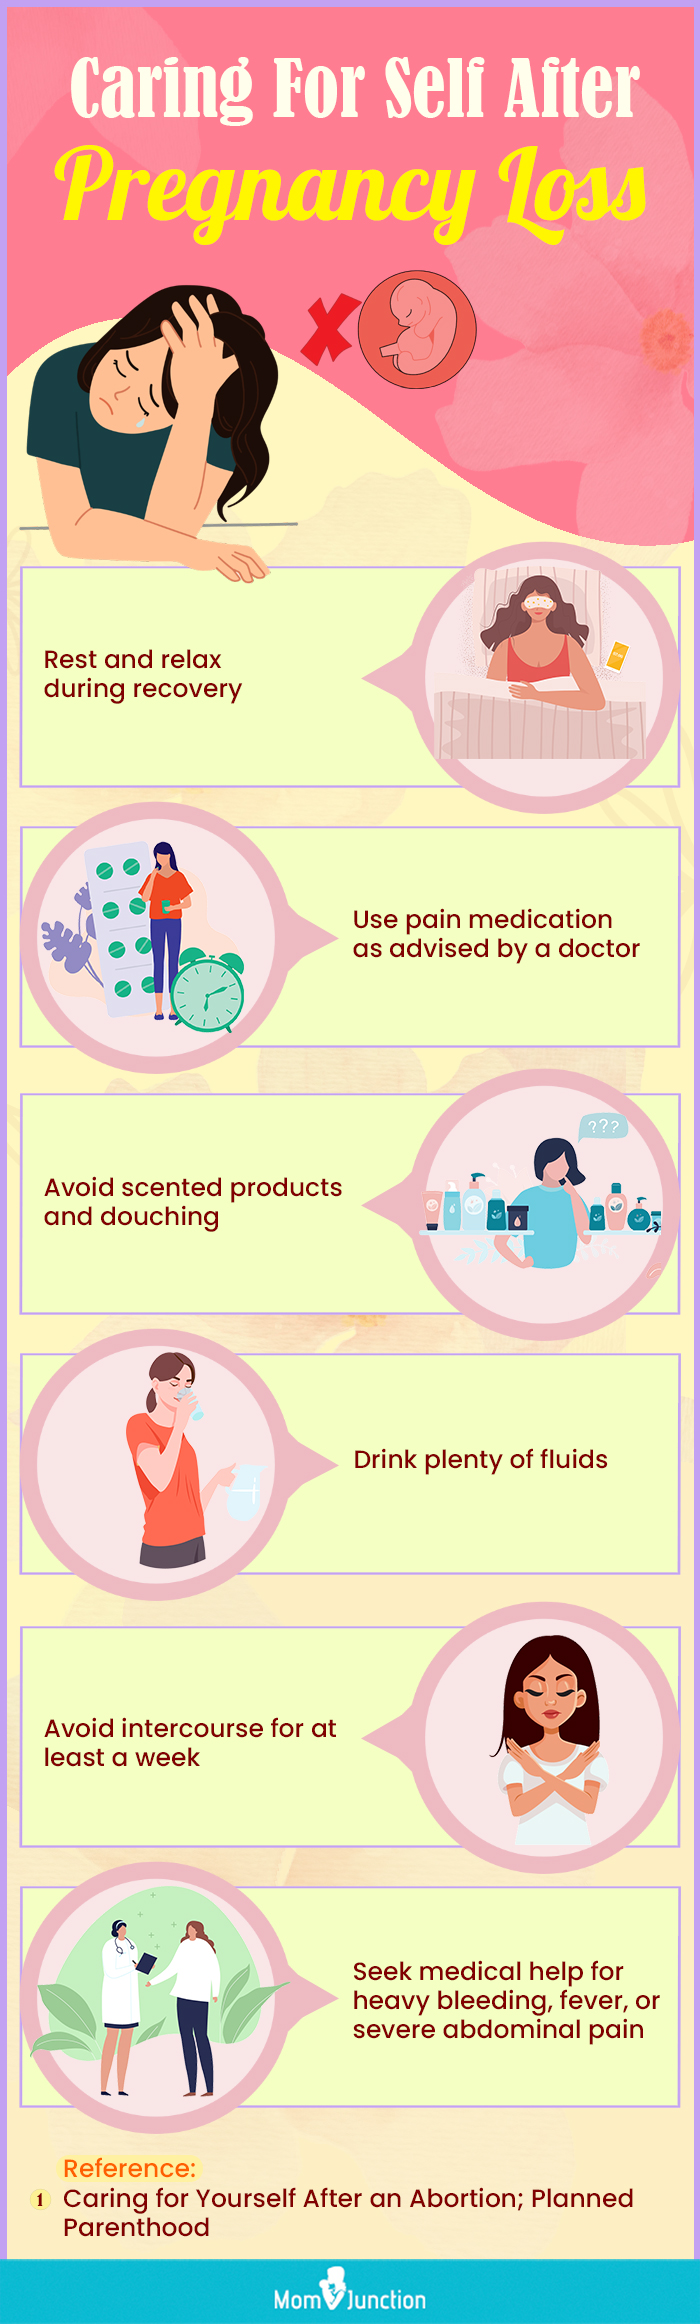 caring for self after pregnancy loss (infographic)